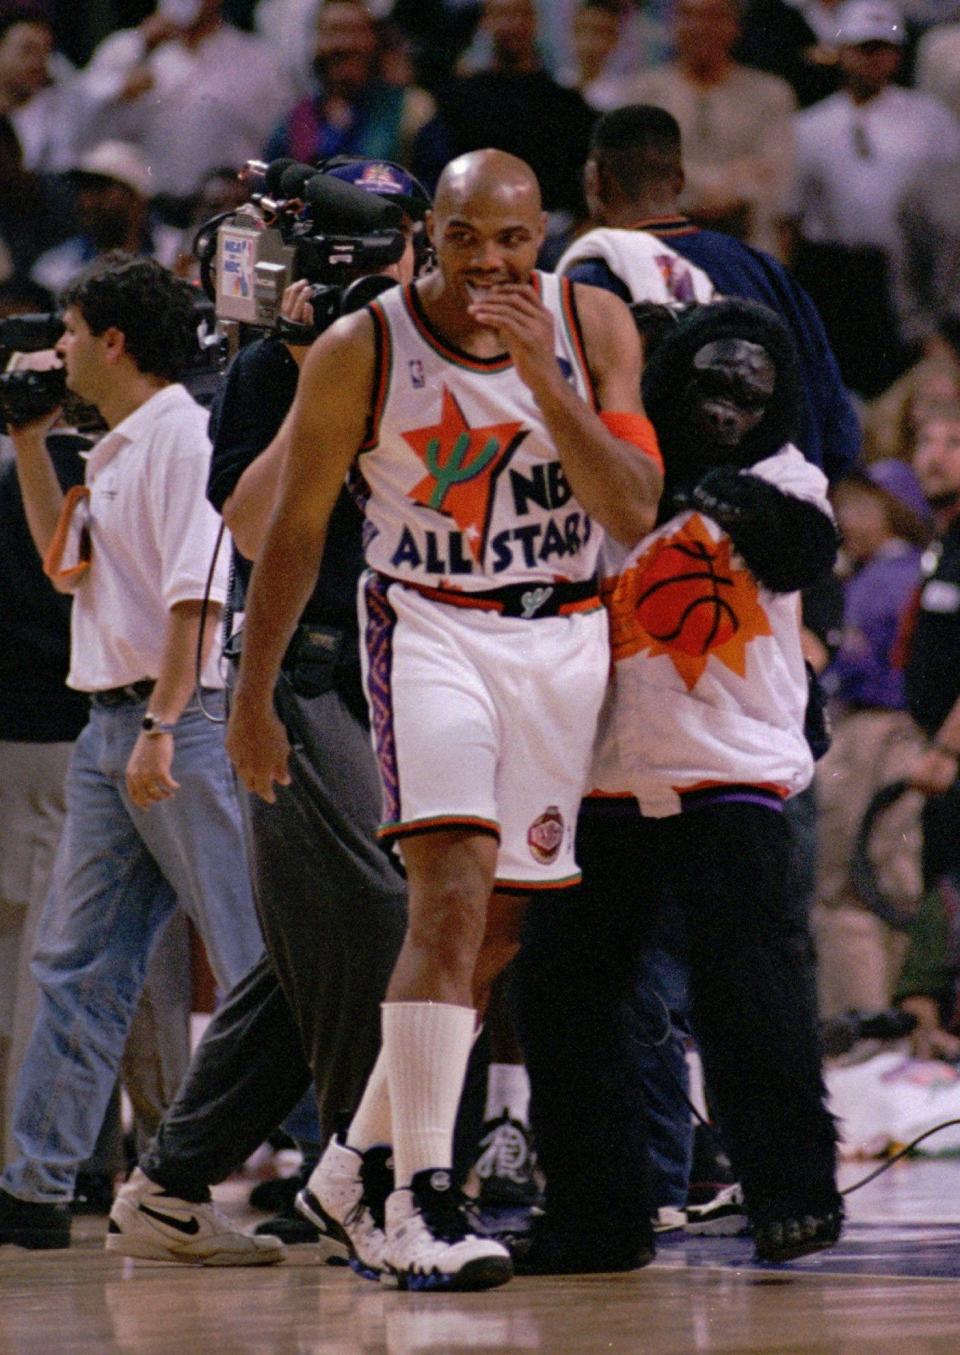 West All Star Charles Barkley of the Phoenix Suns, is seen with the Suns' mascot during an NBA All Star Game time out in Phoenix, Az., February 12, 1995 . (AP Photo/David J. Phillip)